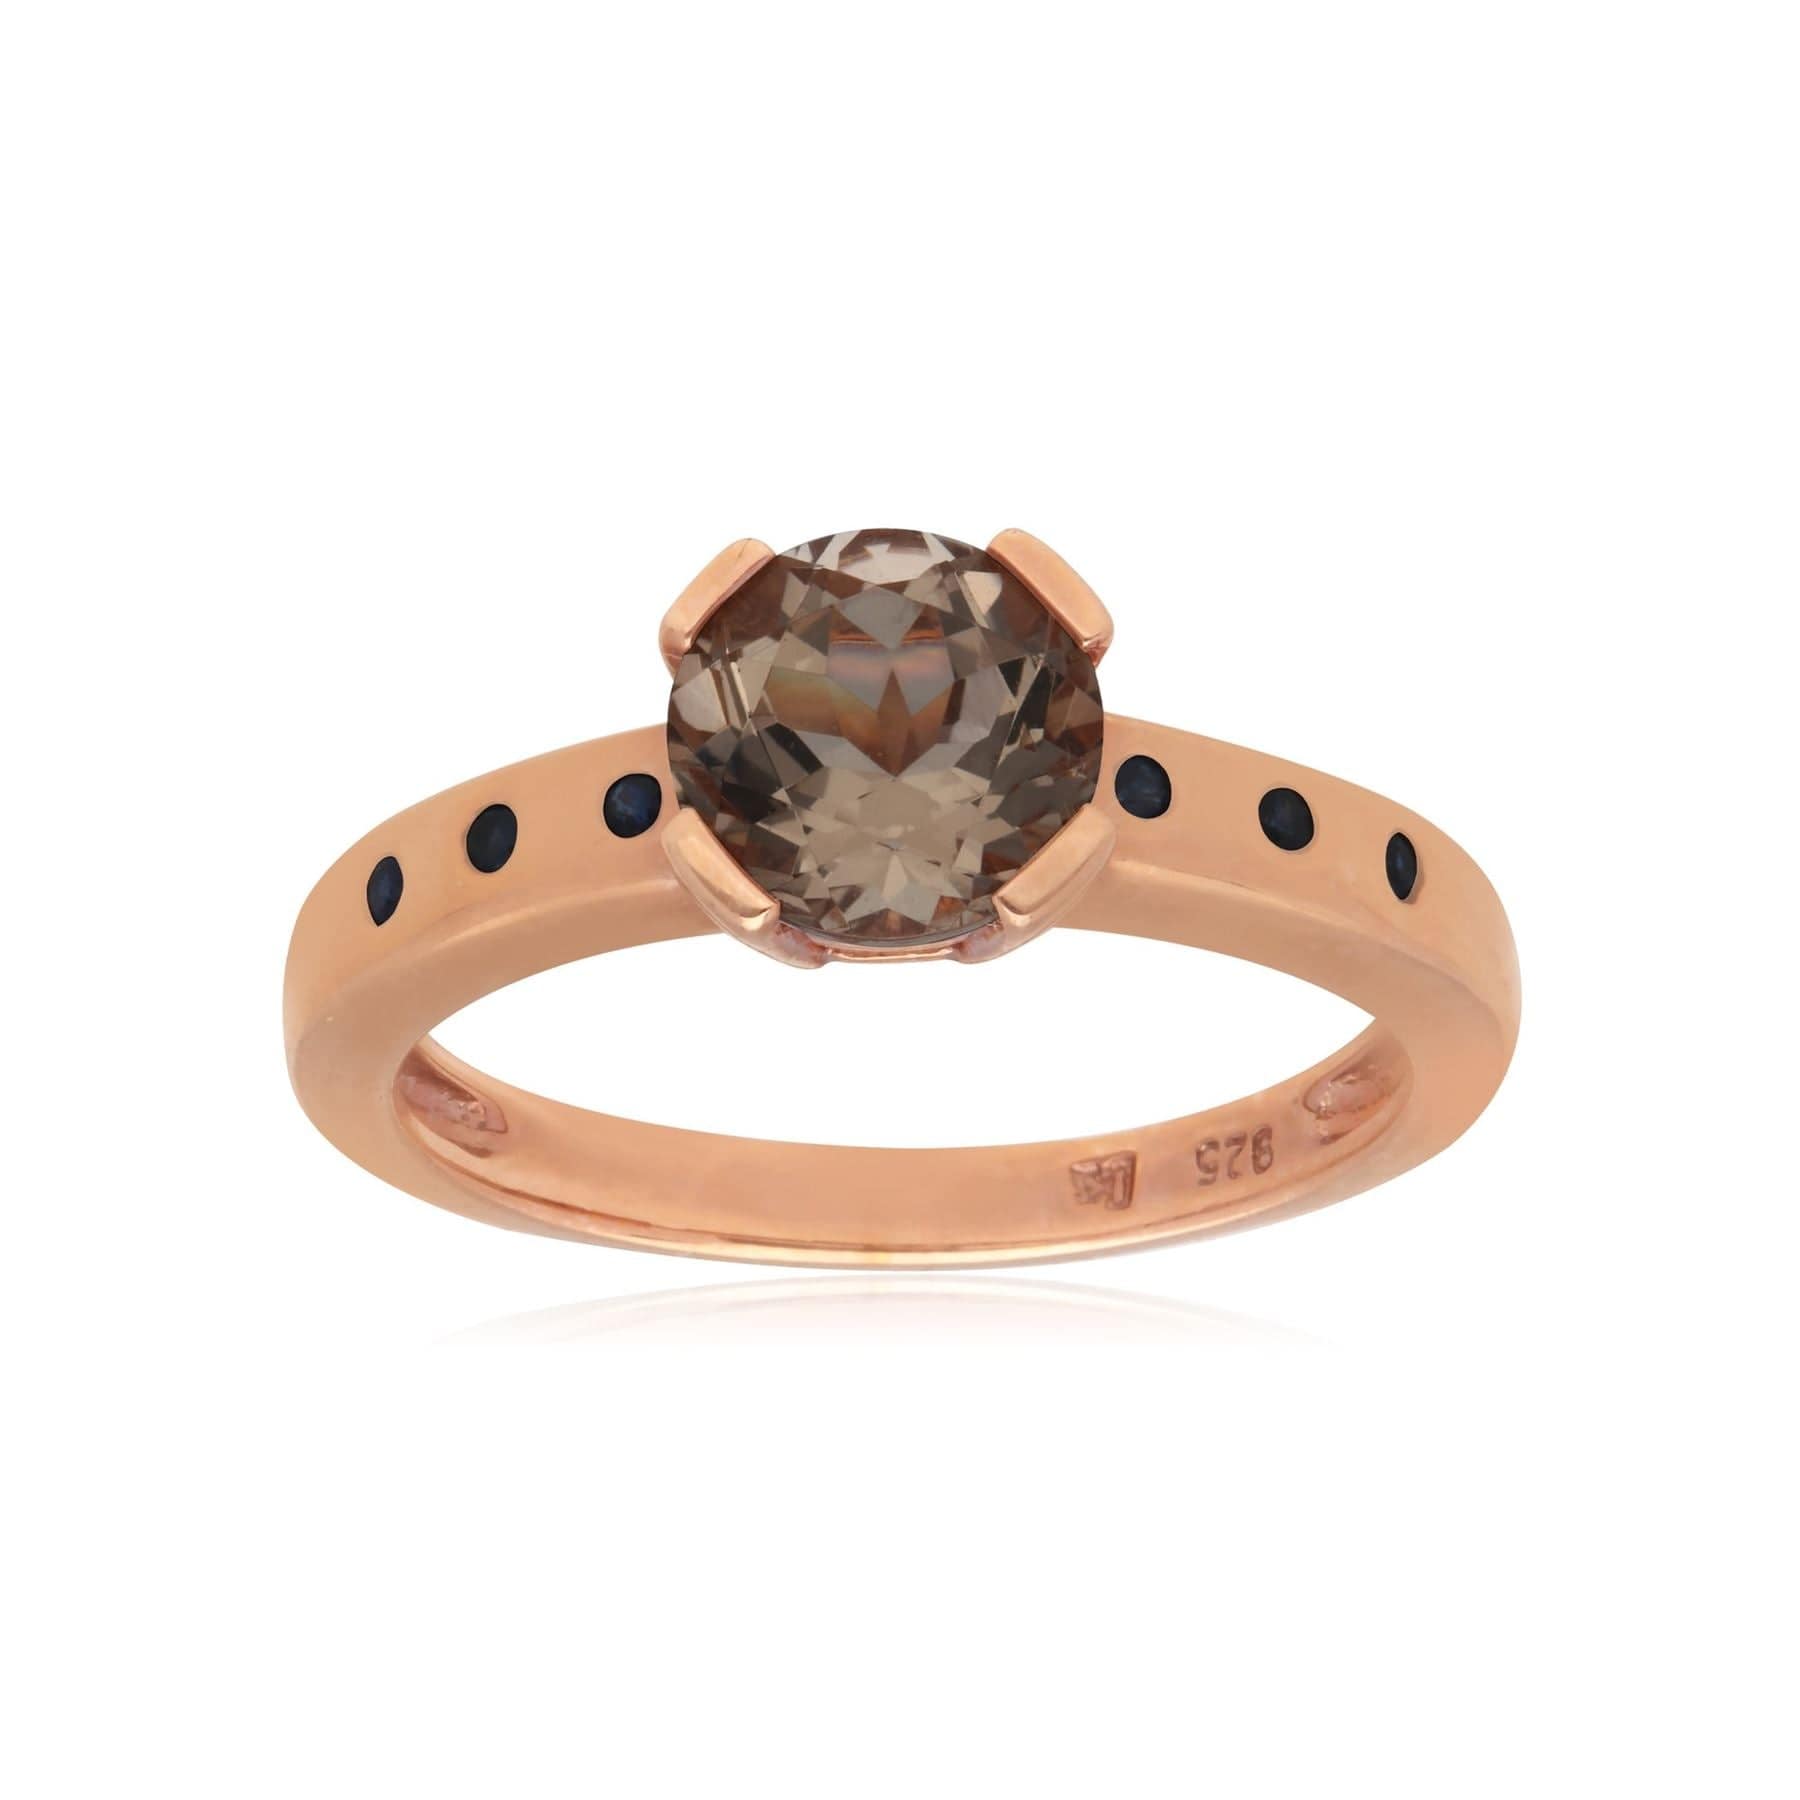 T0552R90W717 Kosmos Morganite Cocktail Ring in Rose Gold Plated Sterling Silver 2